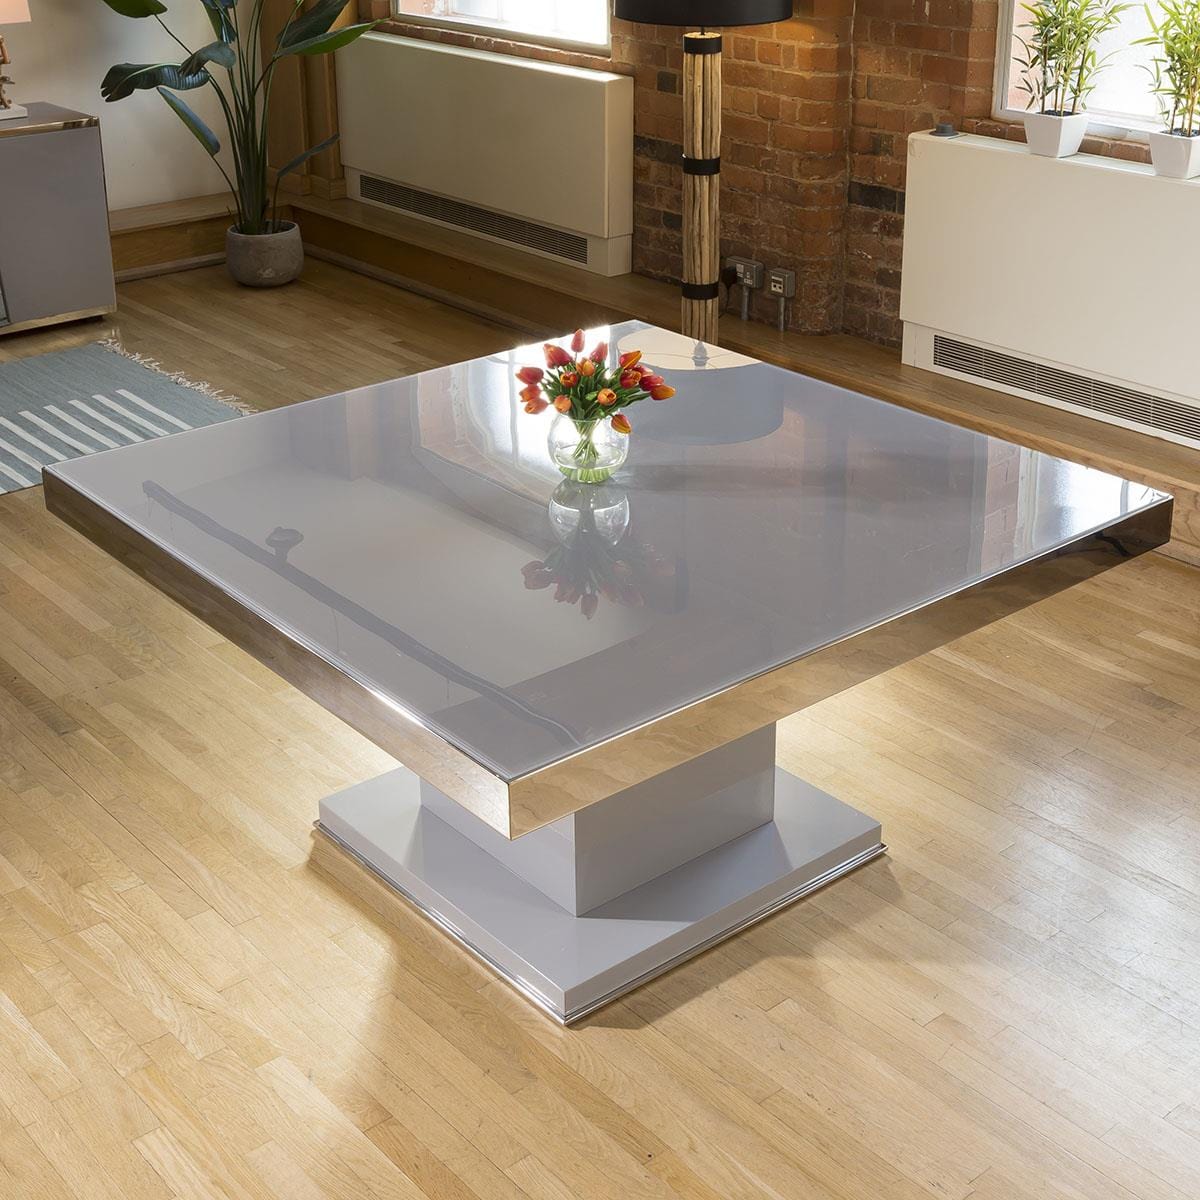 Quatropi Magnificent Large Square Dining Table in Grey Gloss with Chrome Trim